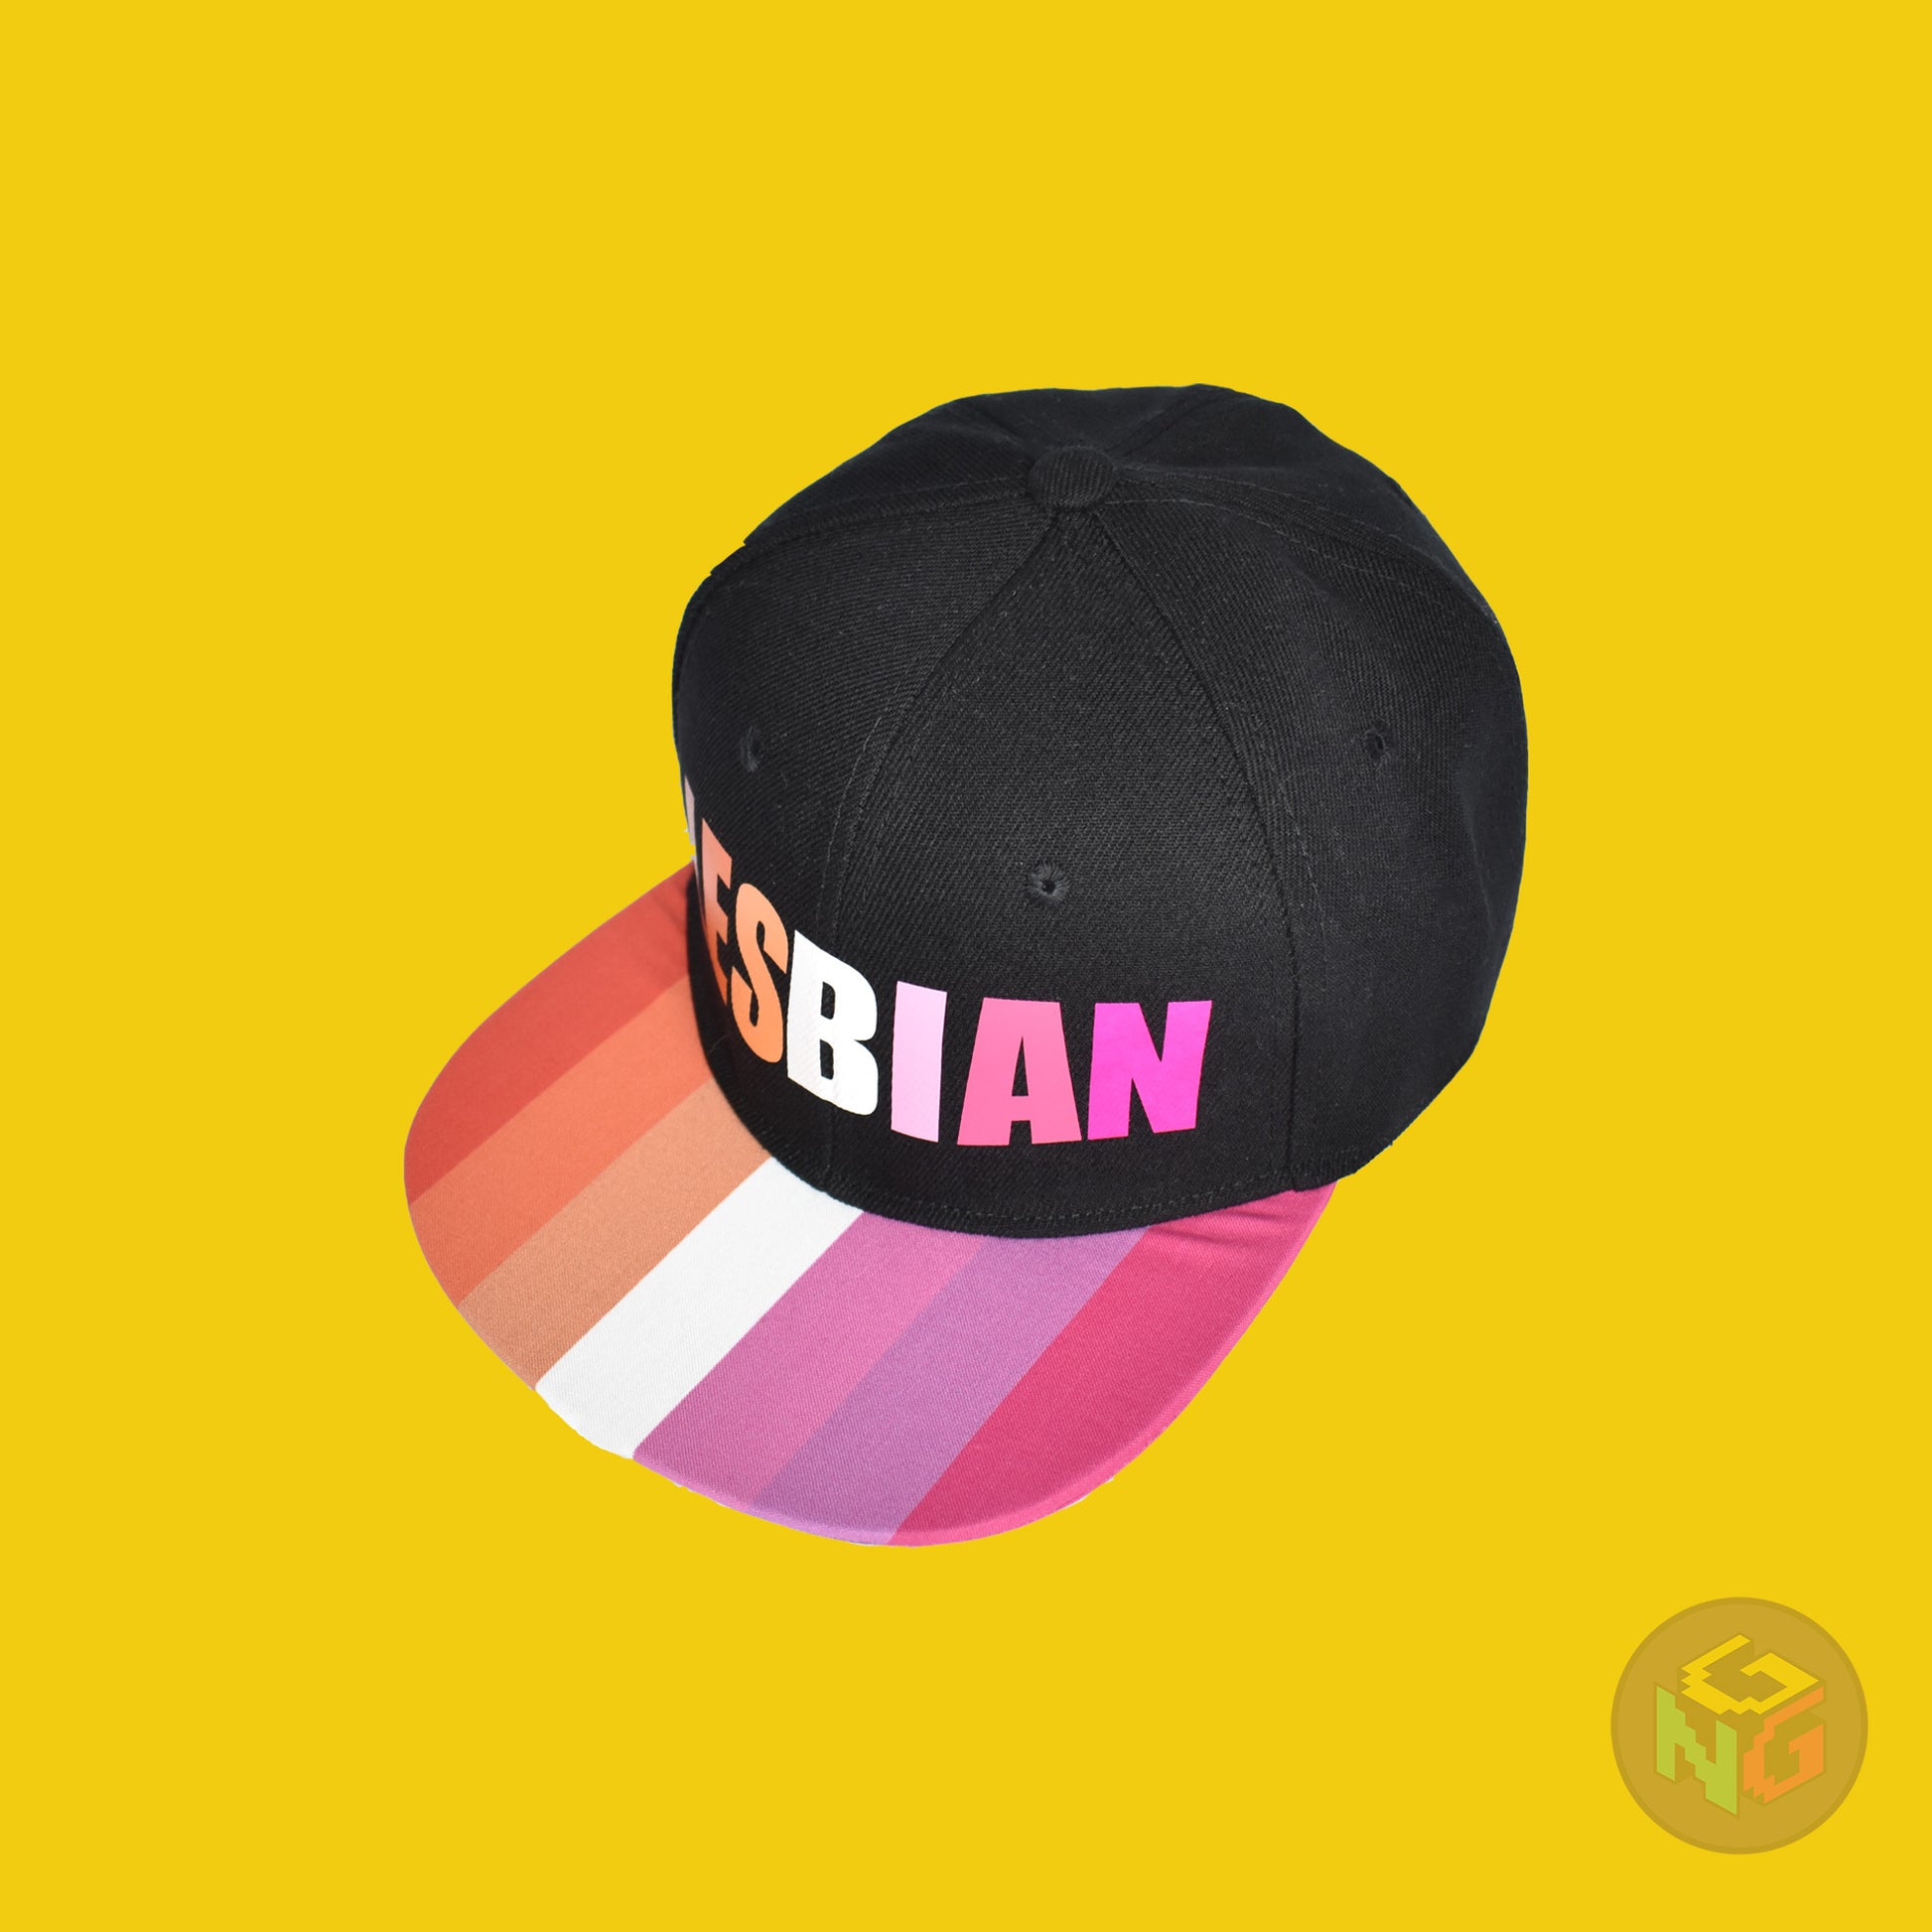 Black flat bill snapback hat. The brim has the lesbian pride flag on both sides and the front of the hat has the word “LESBIAN” in orange, pink, and white letters. Front left view